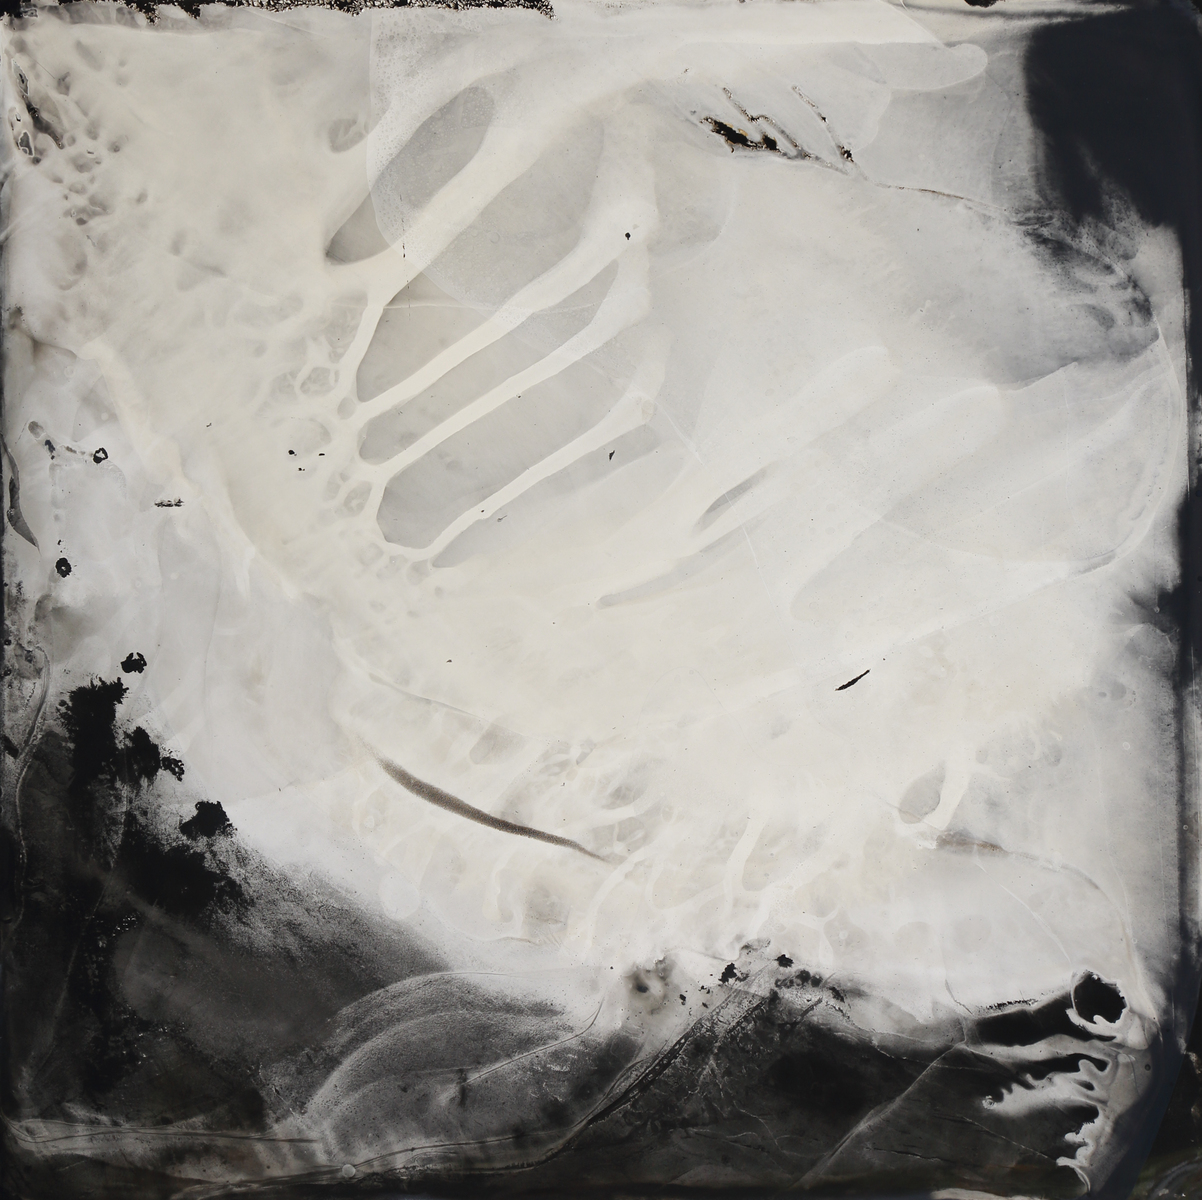 5:35 PM, Nov 18, 2015. Collodion tintype, 24x24 inches.